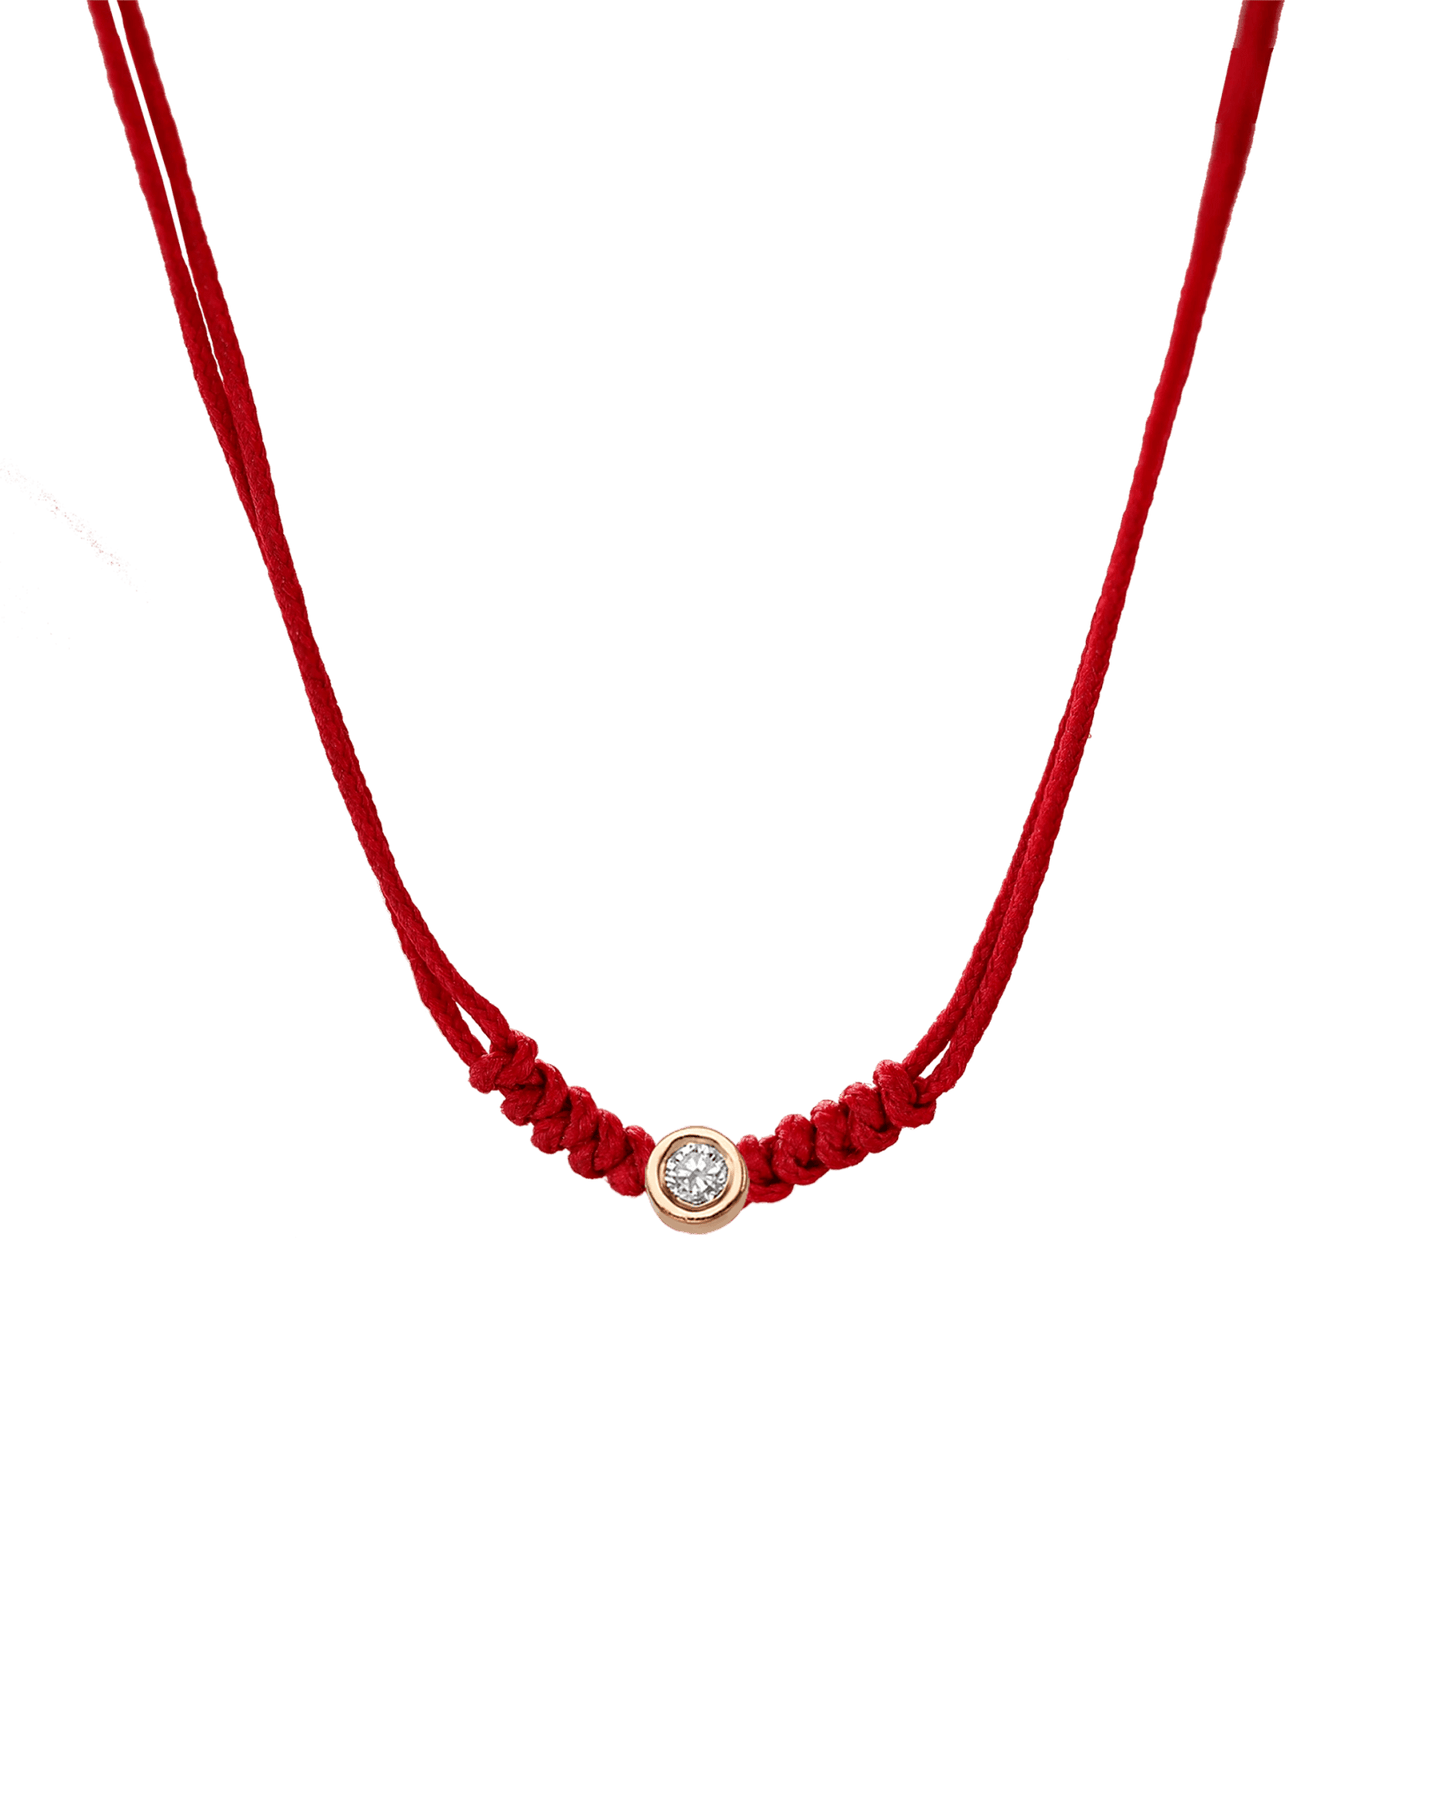 The String of Love Necklace - 14K Rose Gold Necklaces 14K Solid Gold Red Medium: 0.04ct 